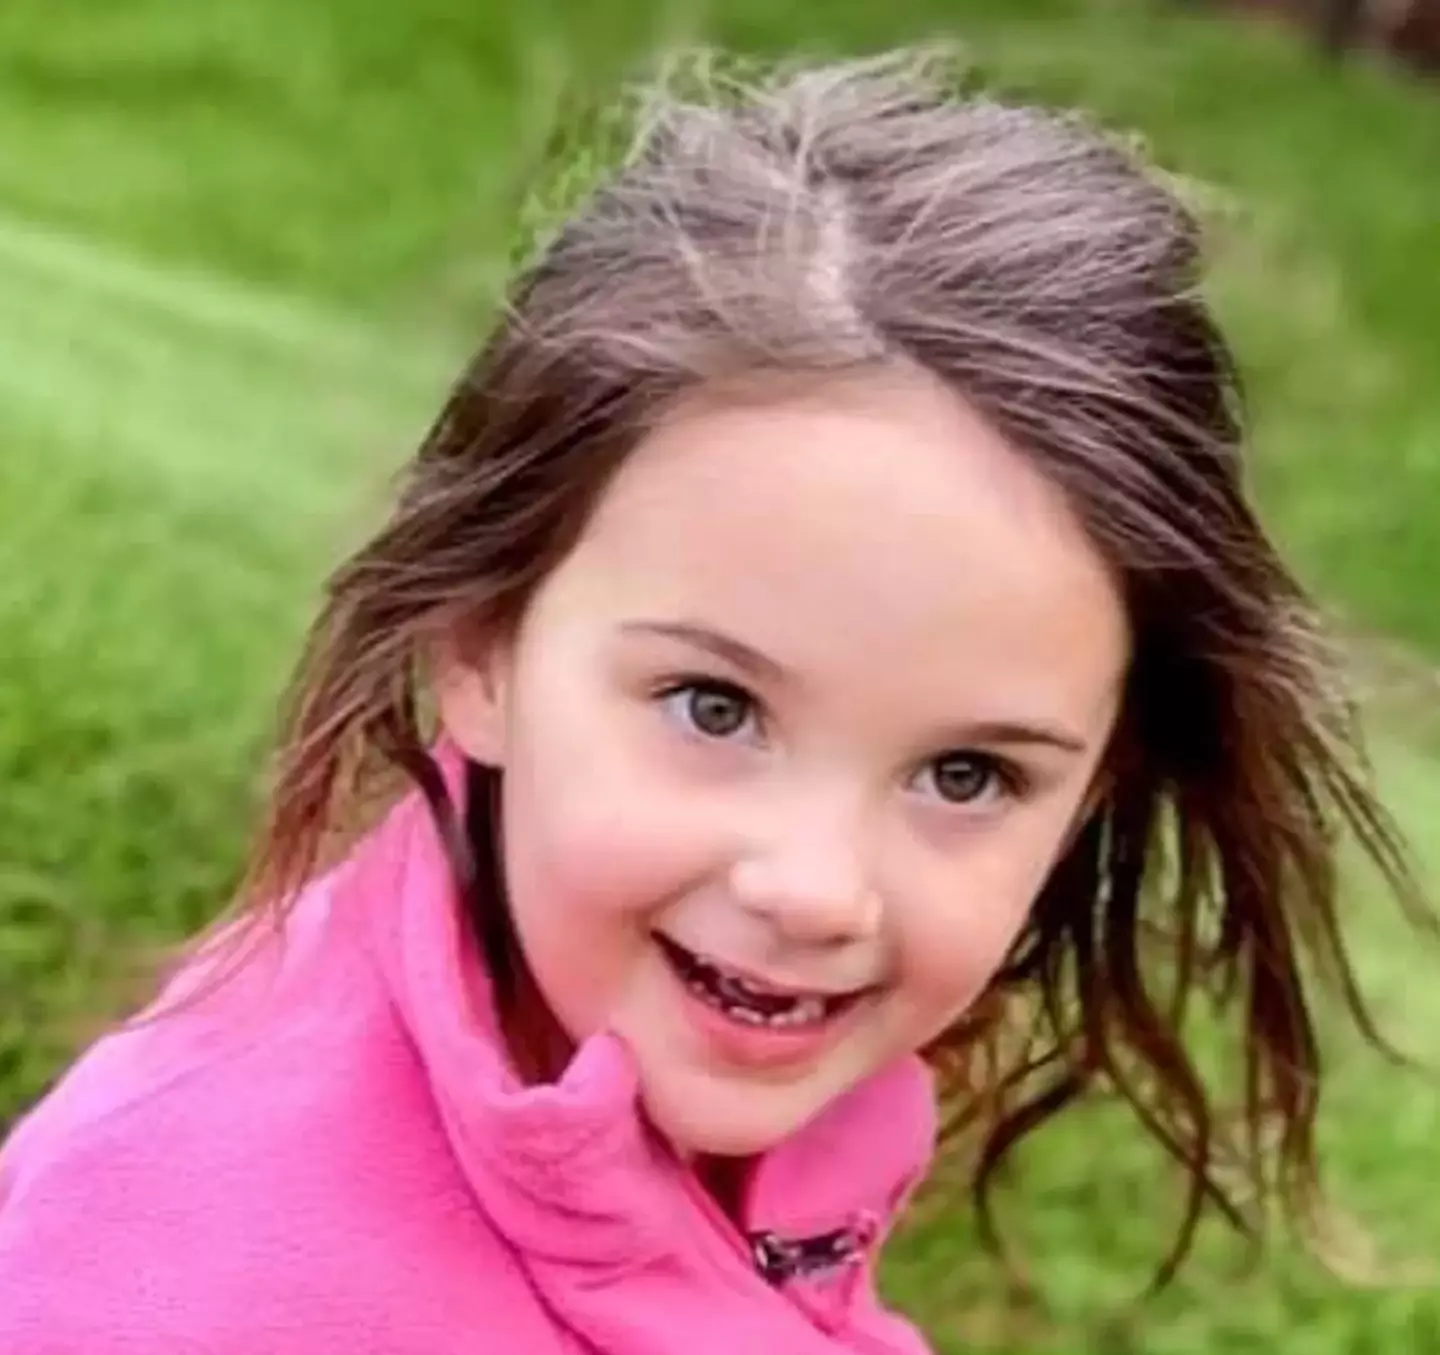 The five-year-old was diagnosed with an incurable brain tumour.